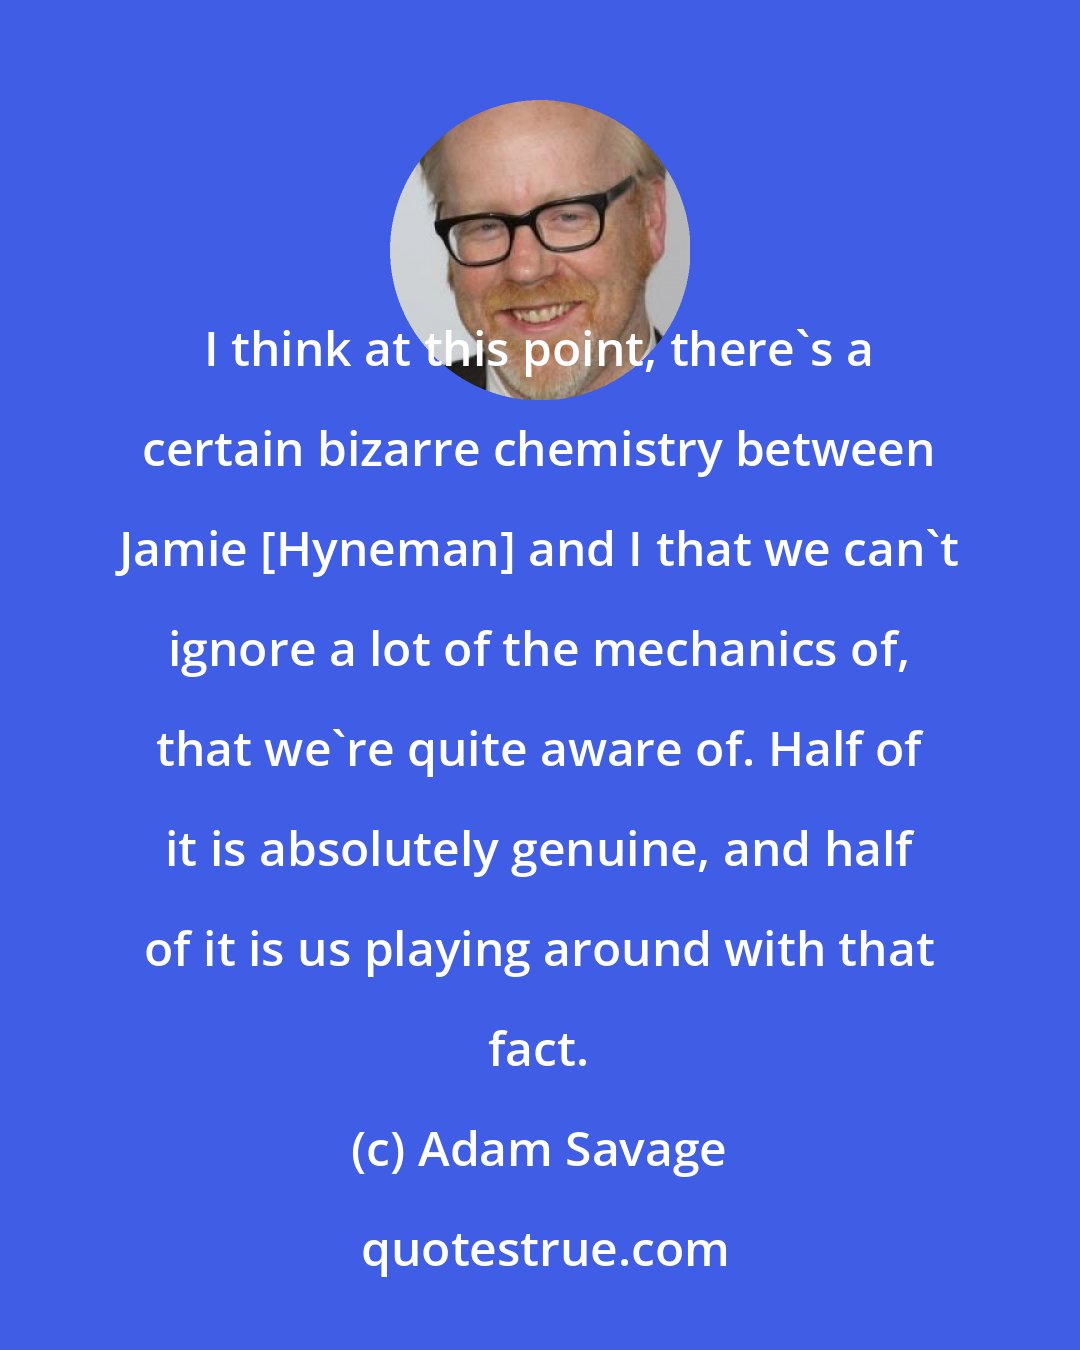 Adam Savage: I think at this point, there's a certain bizarre chemistry between Jamie [Hyneman] and I that we can't ignore a lot of the mechanics of, that we're quite aware of. Half of it is absolutely genuine, and half of it is us playing around with that fact.